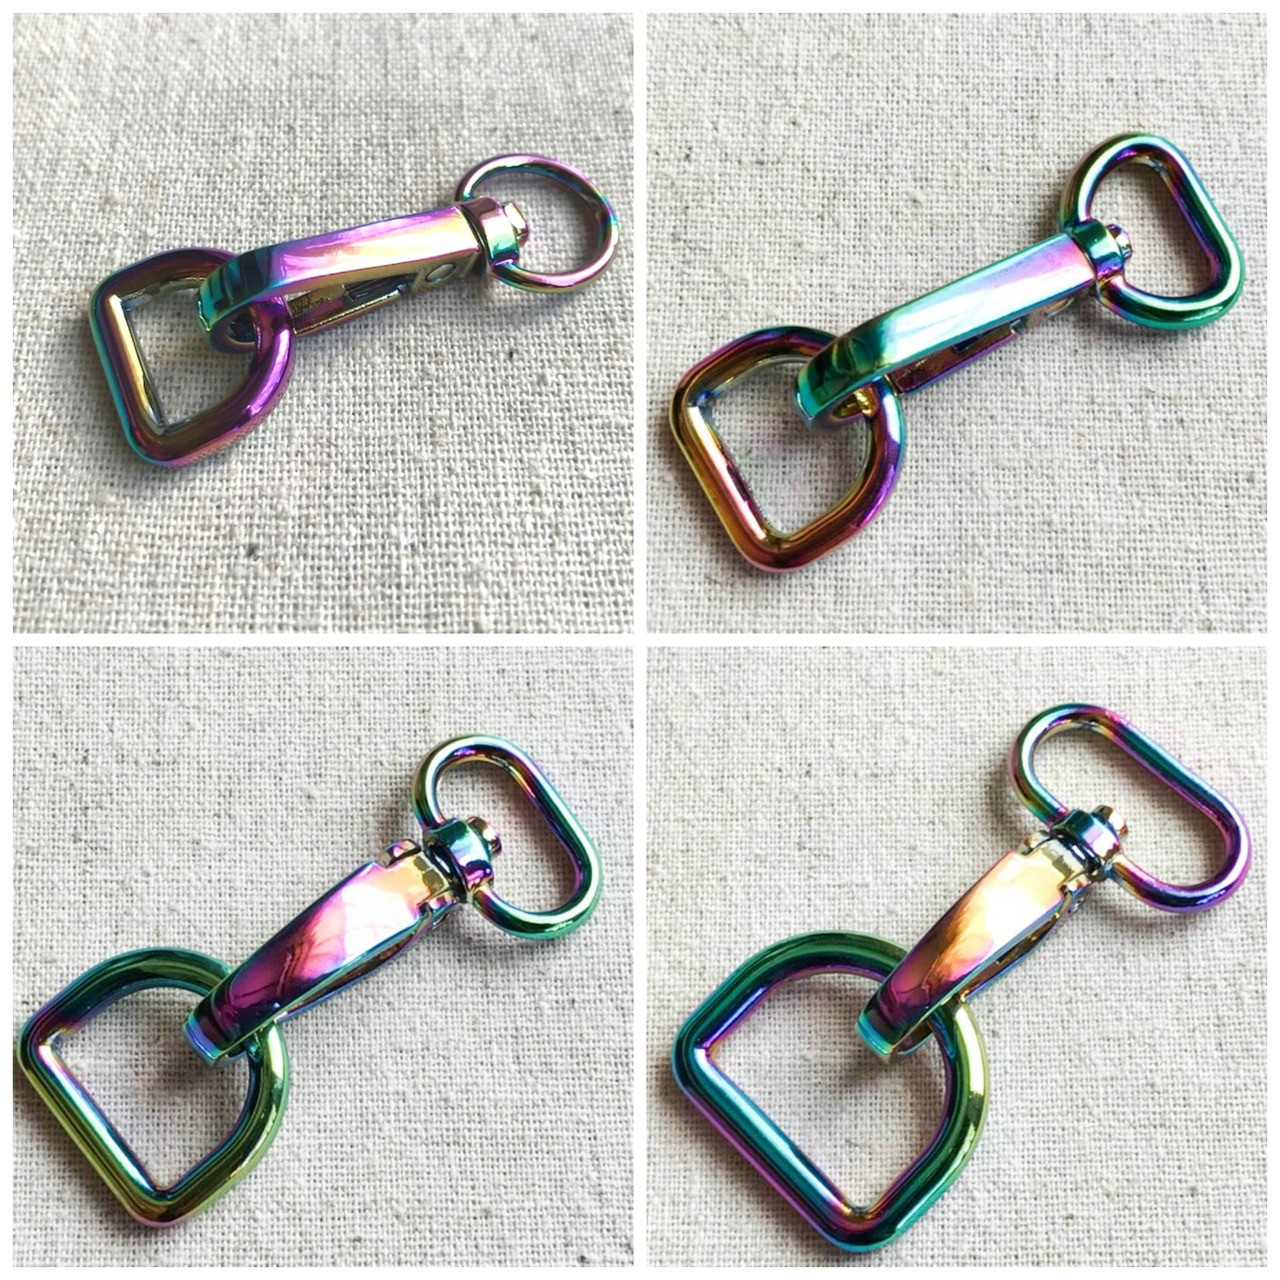 https://cdn10.bigcommerce.com/s-m17mjf99q5/products/625/images/5866/RB_D-Rings_and_Swivels_SETS__63426.1526276241.1280.1280.jpg?c=2